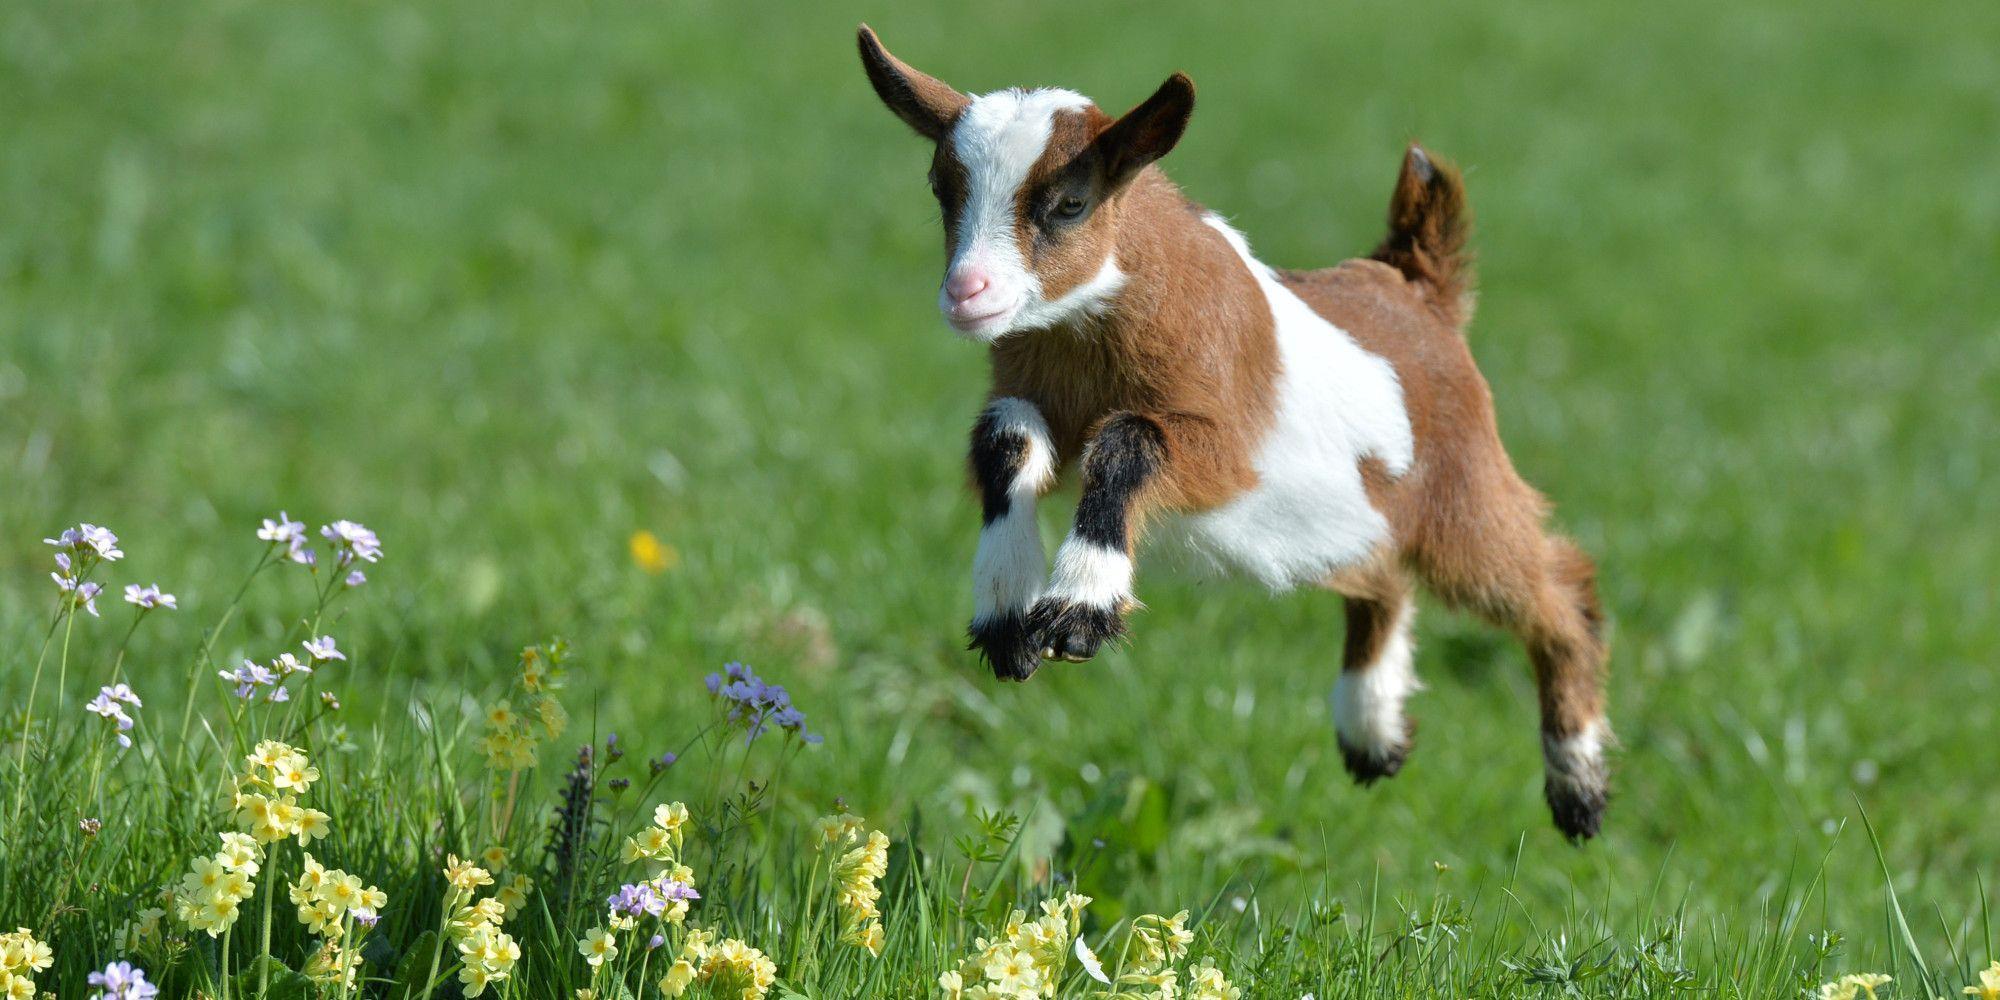 Cute Goats Wallpaper, Picture, Image